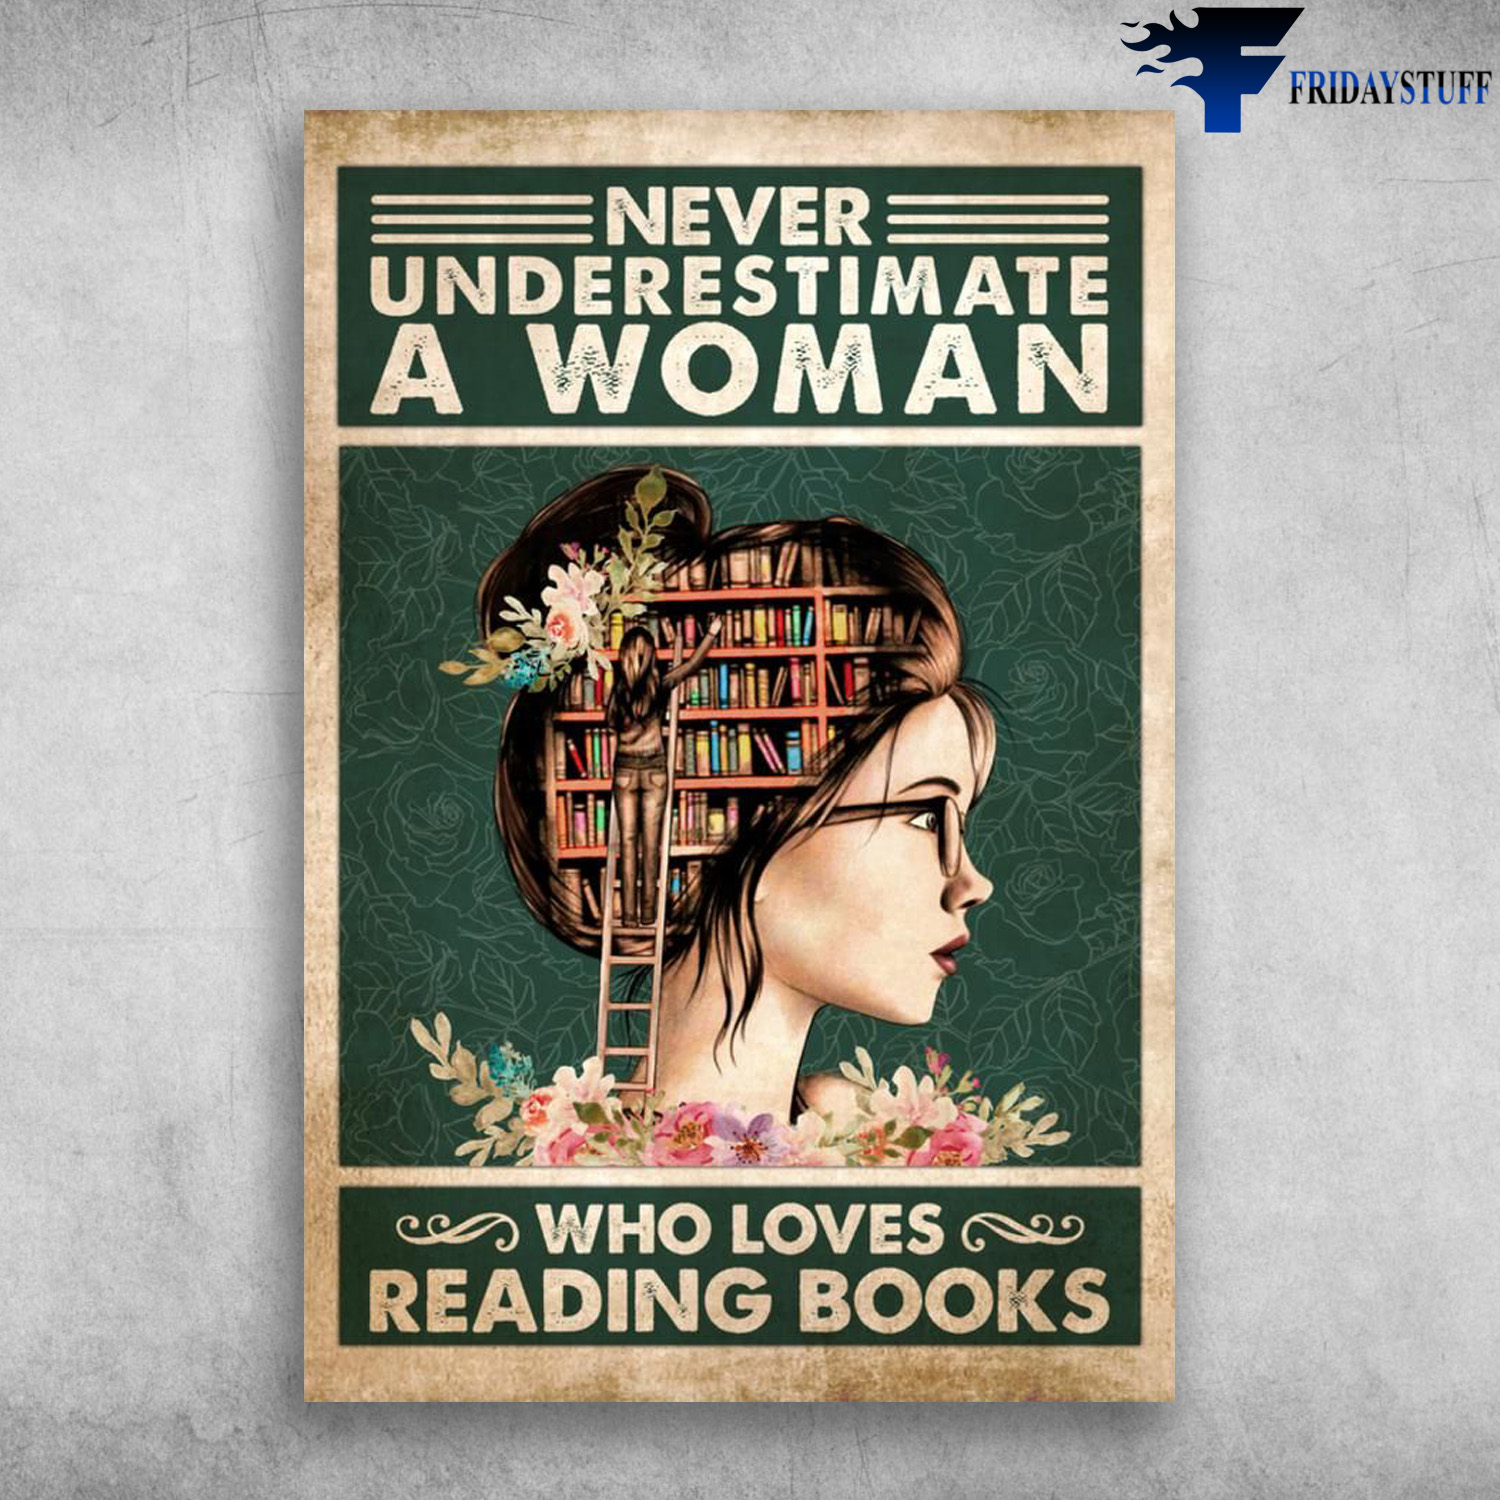 Girl Reads Book - Never Underestimate A Woman, Who Loves Reading Book